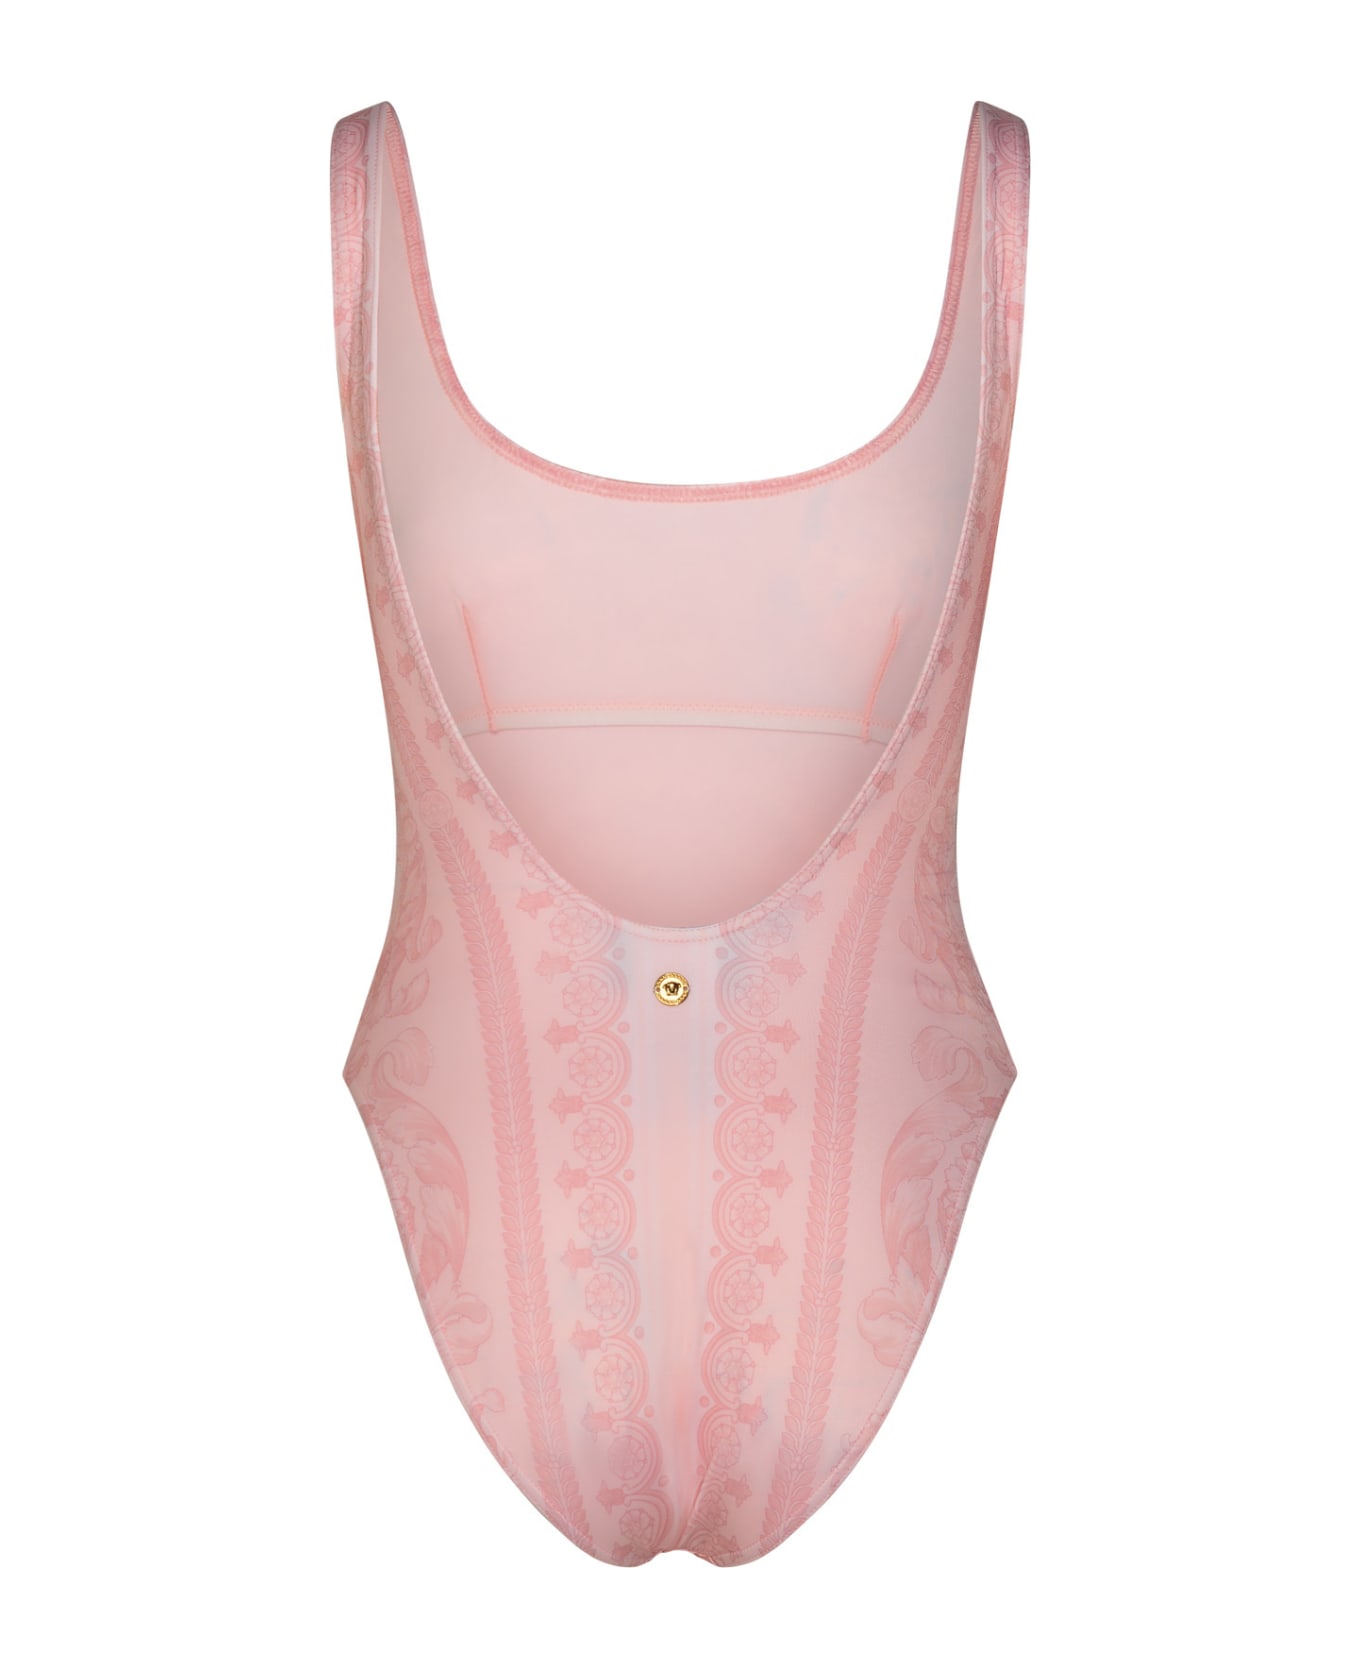 Versace 'barocco' One-piece Swimsuit In Pink Polyester Blend - Pale Pink